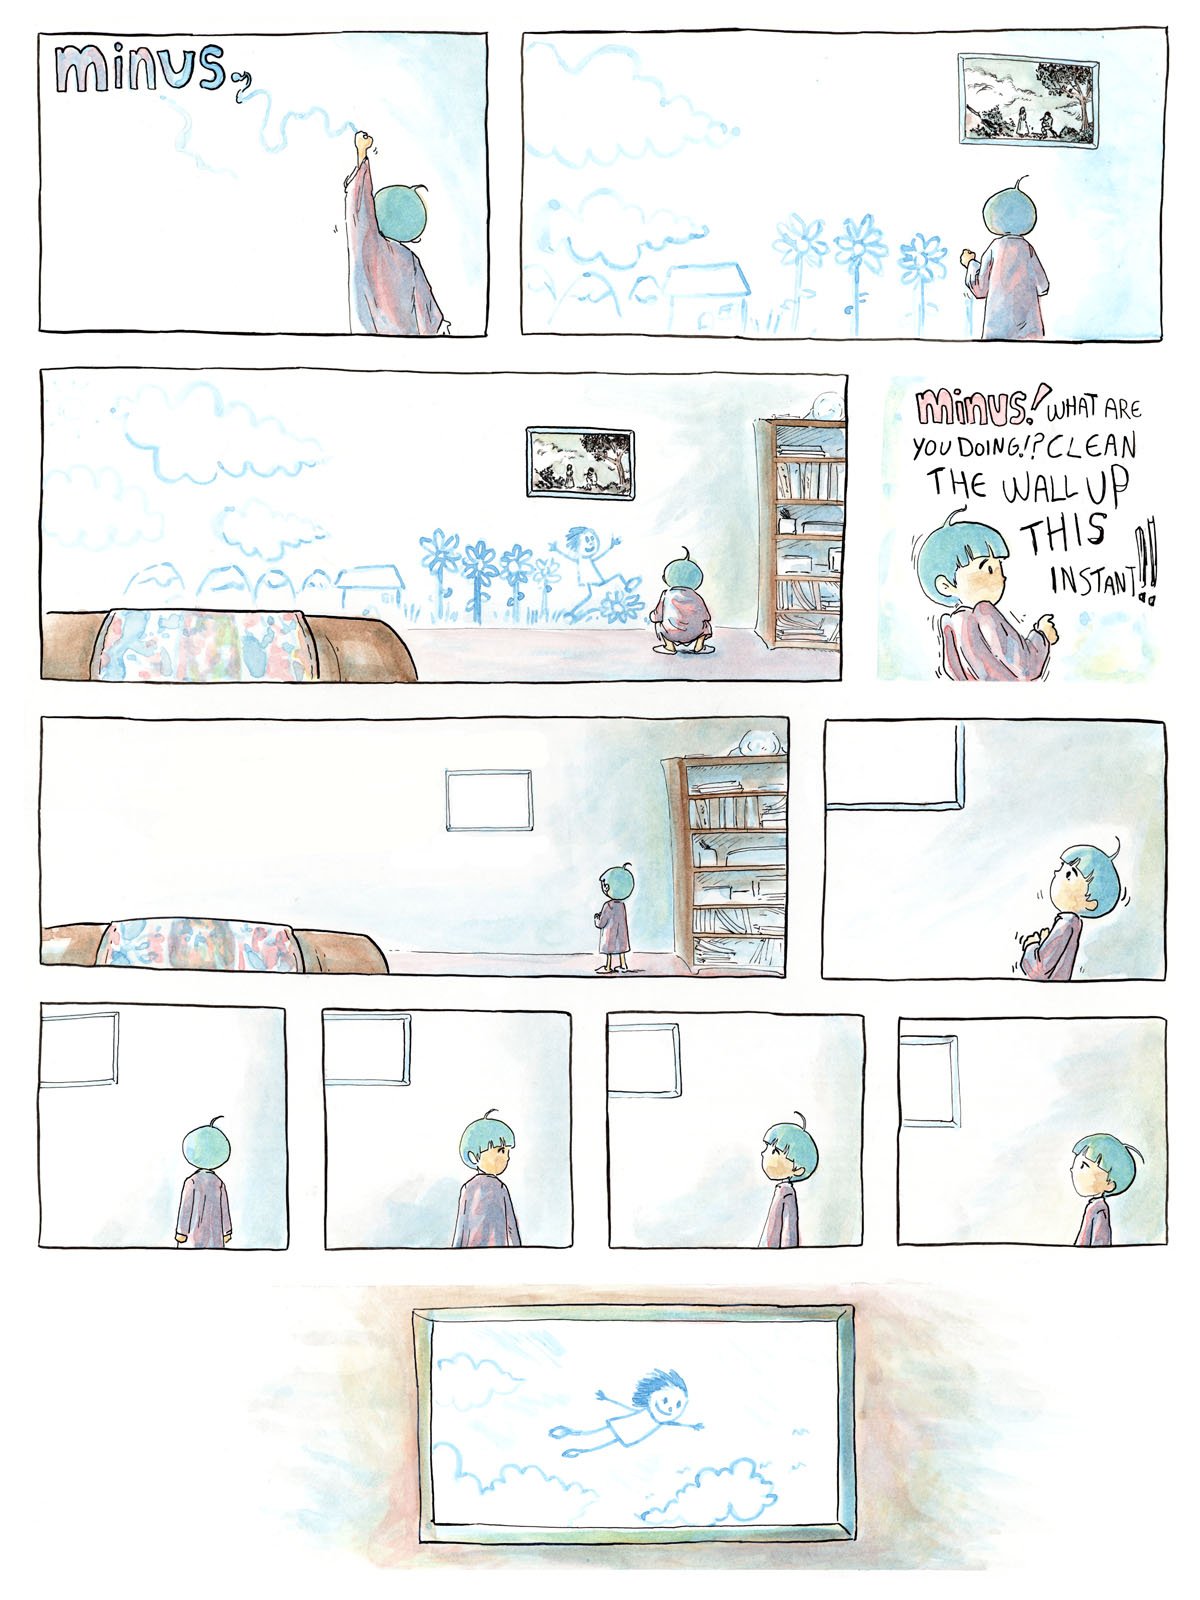 Comic strip. Transcription. Title: "minus." minus uses a blue crayon to draw on a white wall. She draws clouds, mountains, houses, and flowers. In the background is a painting of a man proposing to a woman. The wall is in minus's bedroom, in the foreground are her bed and a bookshelf. minus draws another girl on the wall, who is jumping over a flower. A voice: "minus! What are you doing?! Clean the wall up this instant!!" minus shakes in response. The wall becomes entirely blank, including the painting, leaving only a blank canvas in a frame. minus shudders as she looks at the blank canvas. She turns around and sees no one there. In the last panel, we see a blue crayon drawing on the canvas of a girl flying through the clouds.